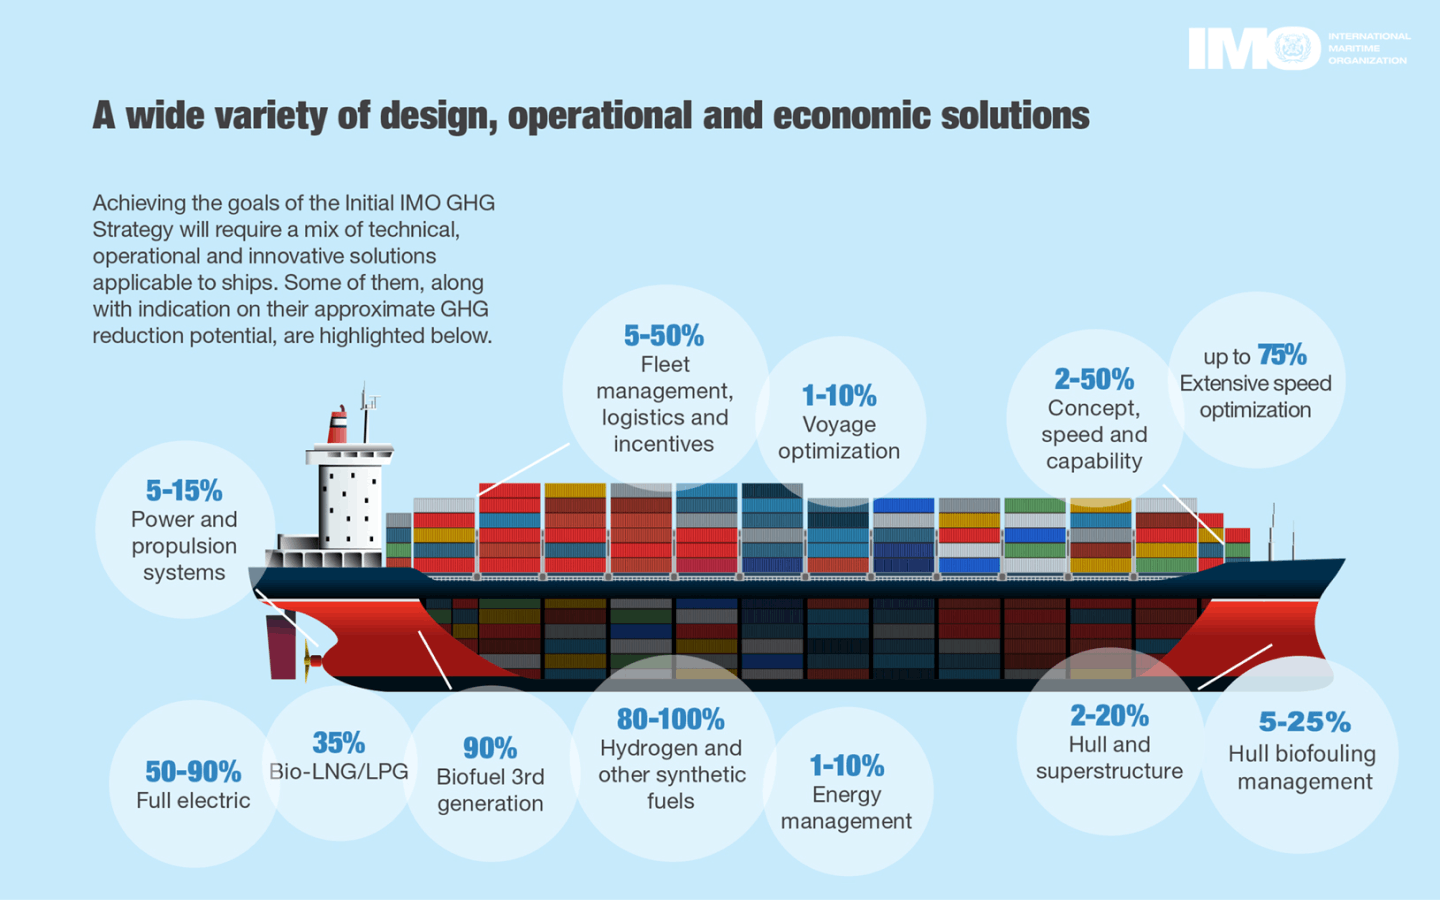 IMO advice on design, operational, and economic solutions for reducing emissions from ships